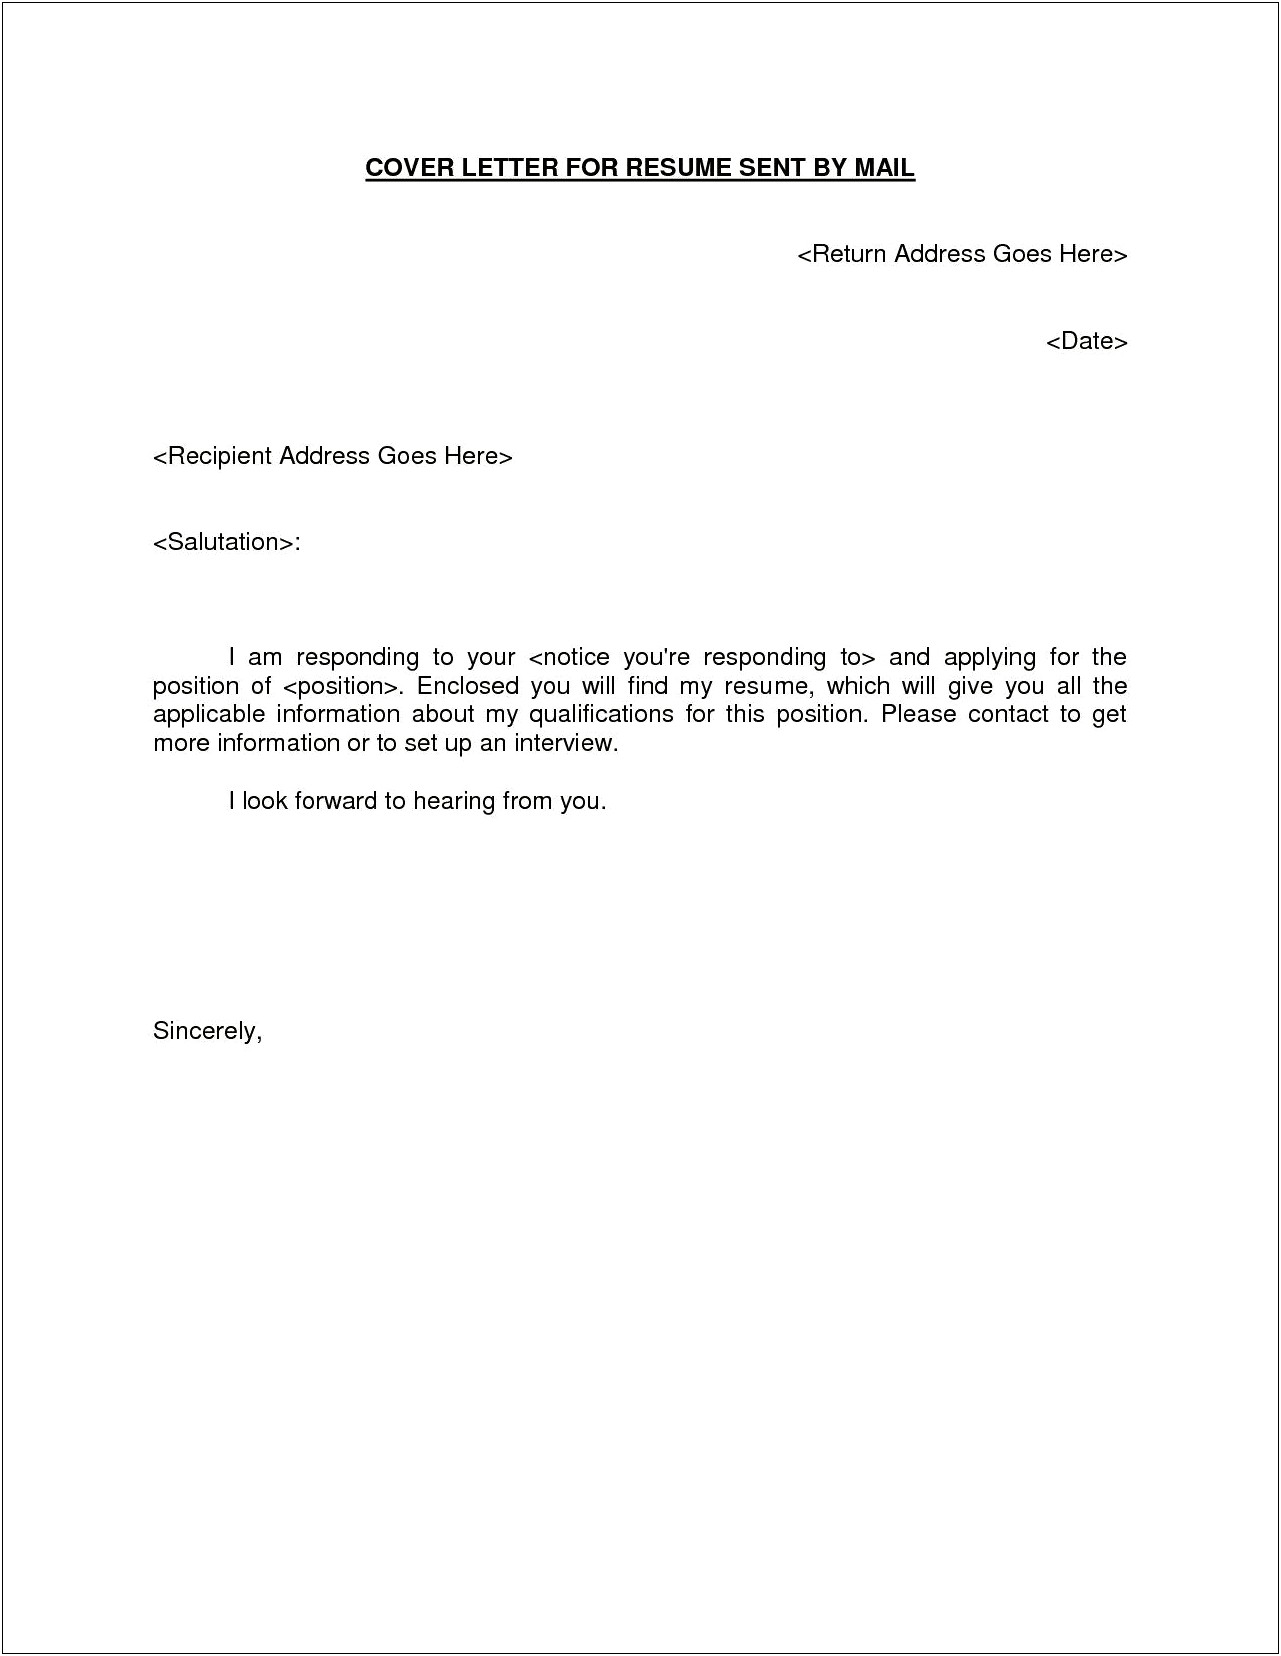 Sample Email To Submit Resume And Cover Letter